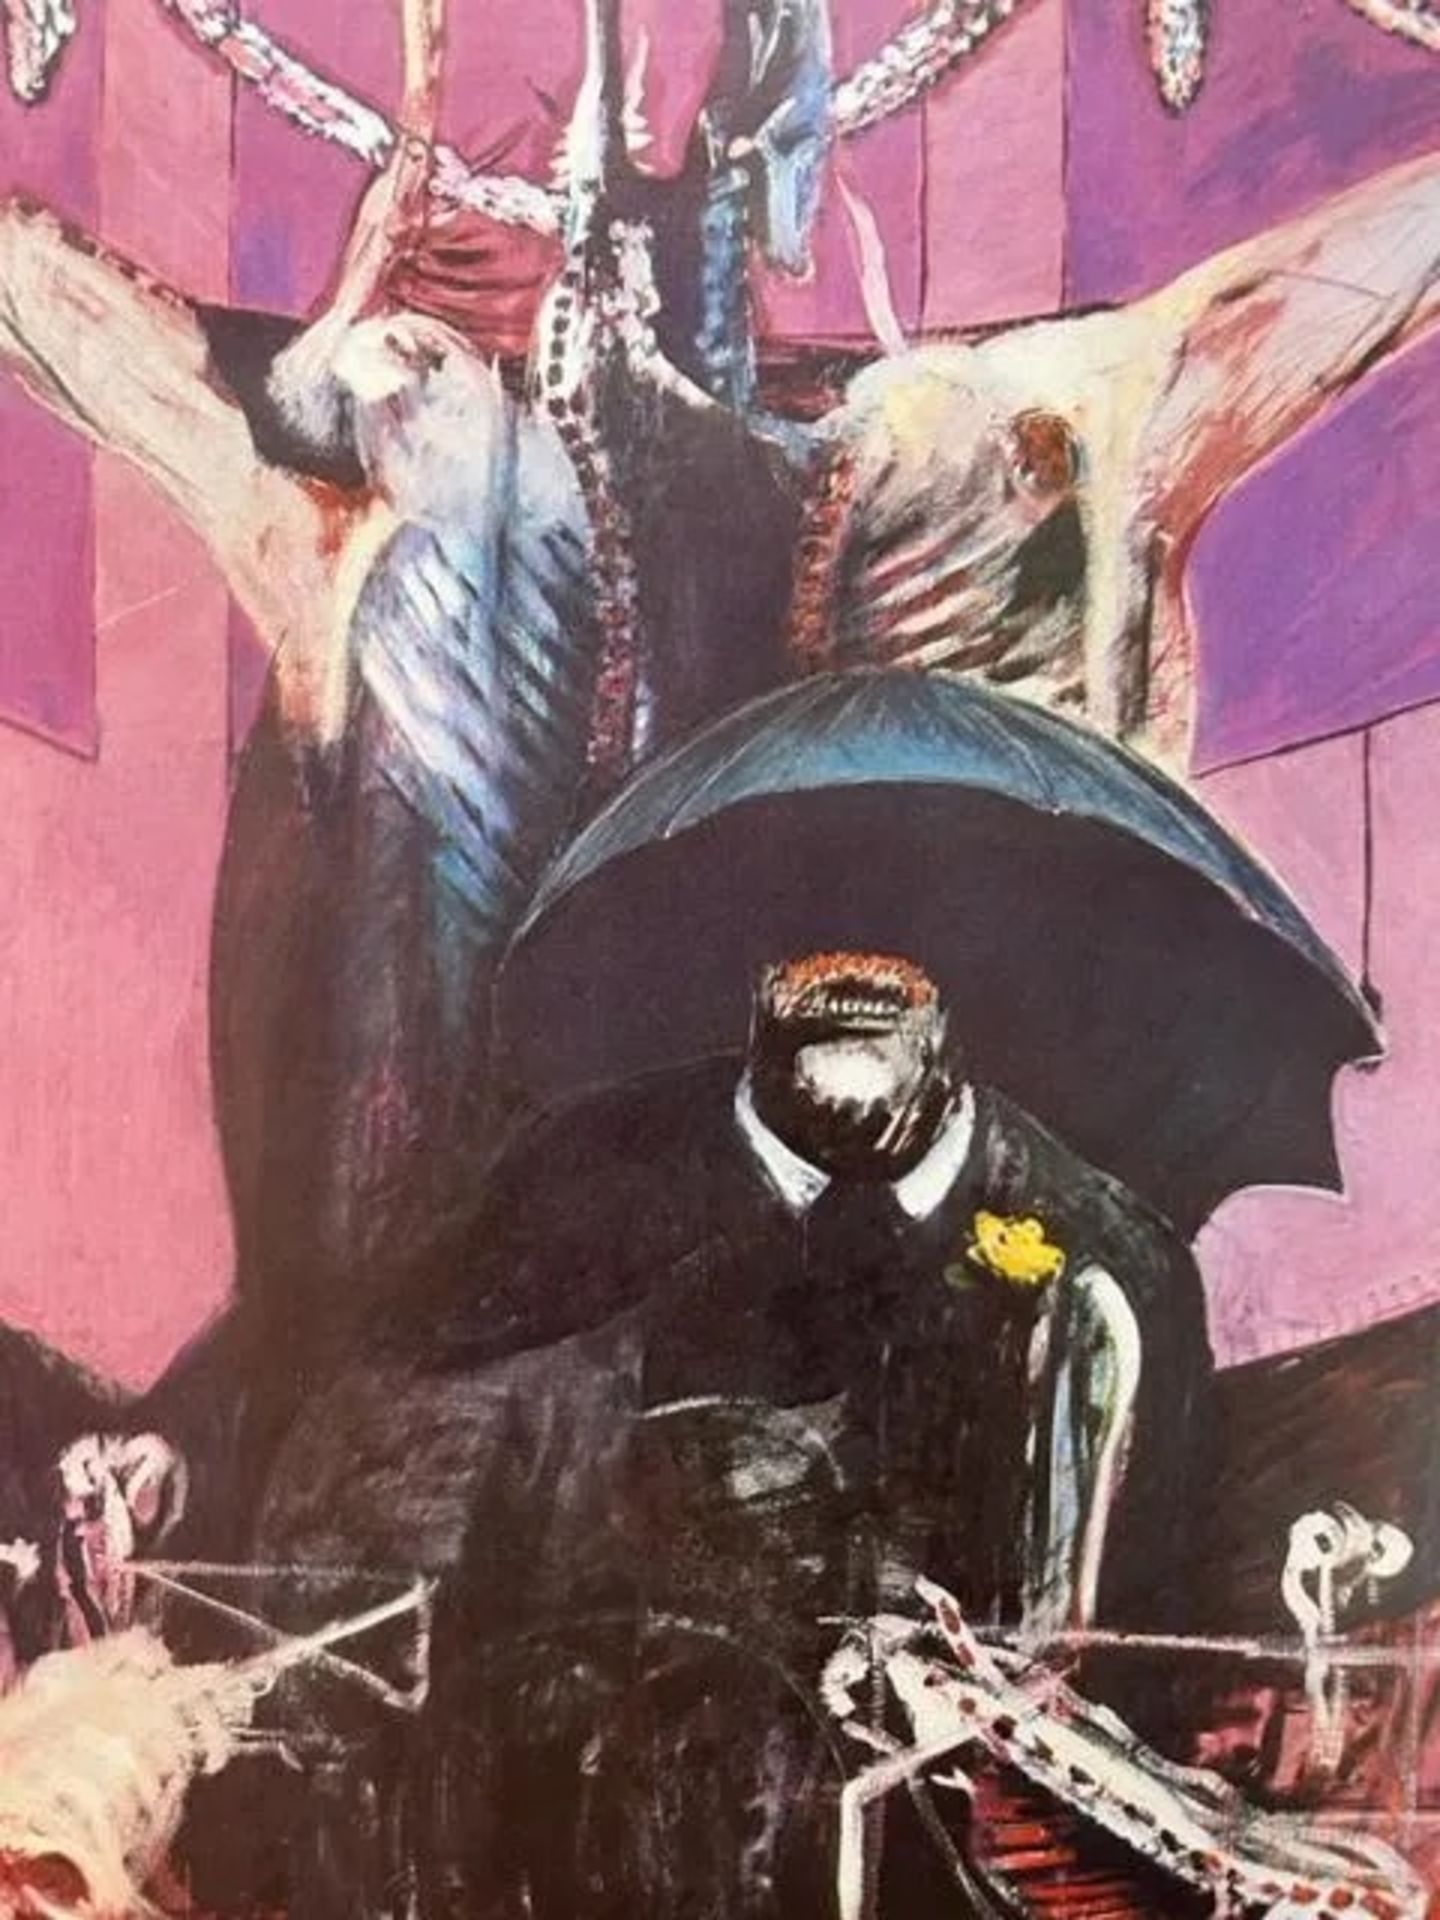 Francis Bacon "Pink Crucifiction" Print - Image 2 of 6